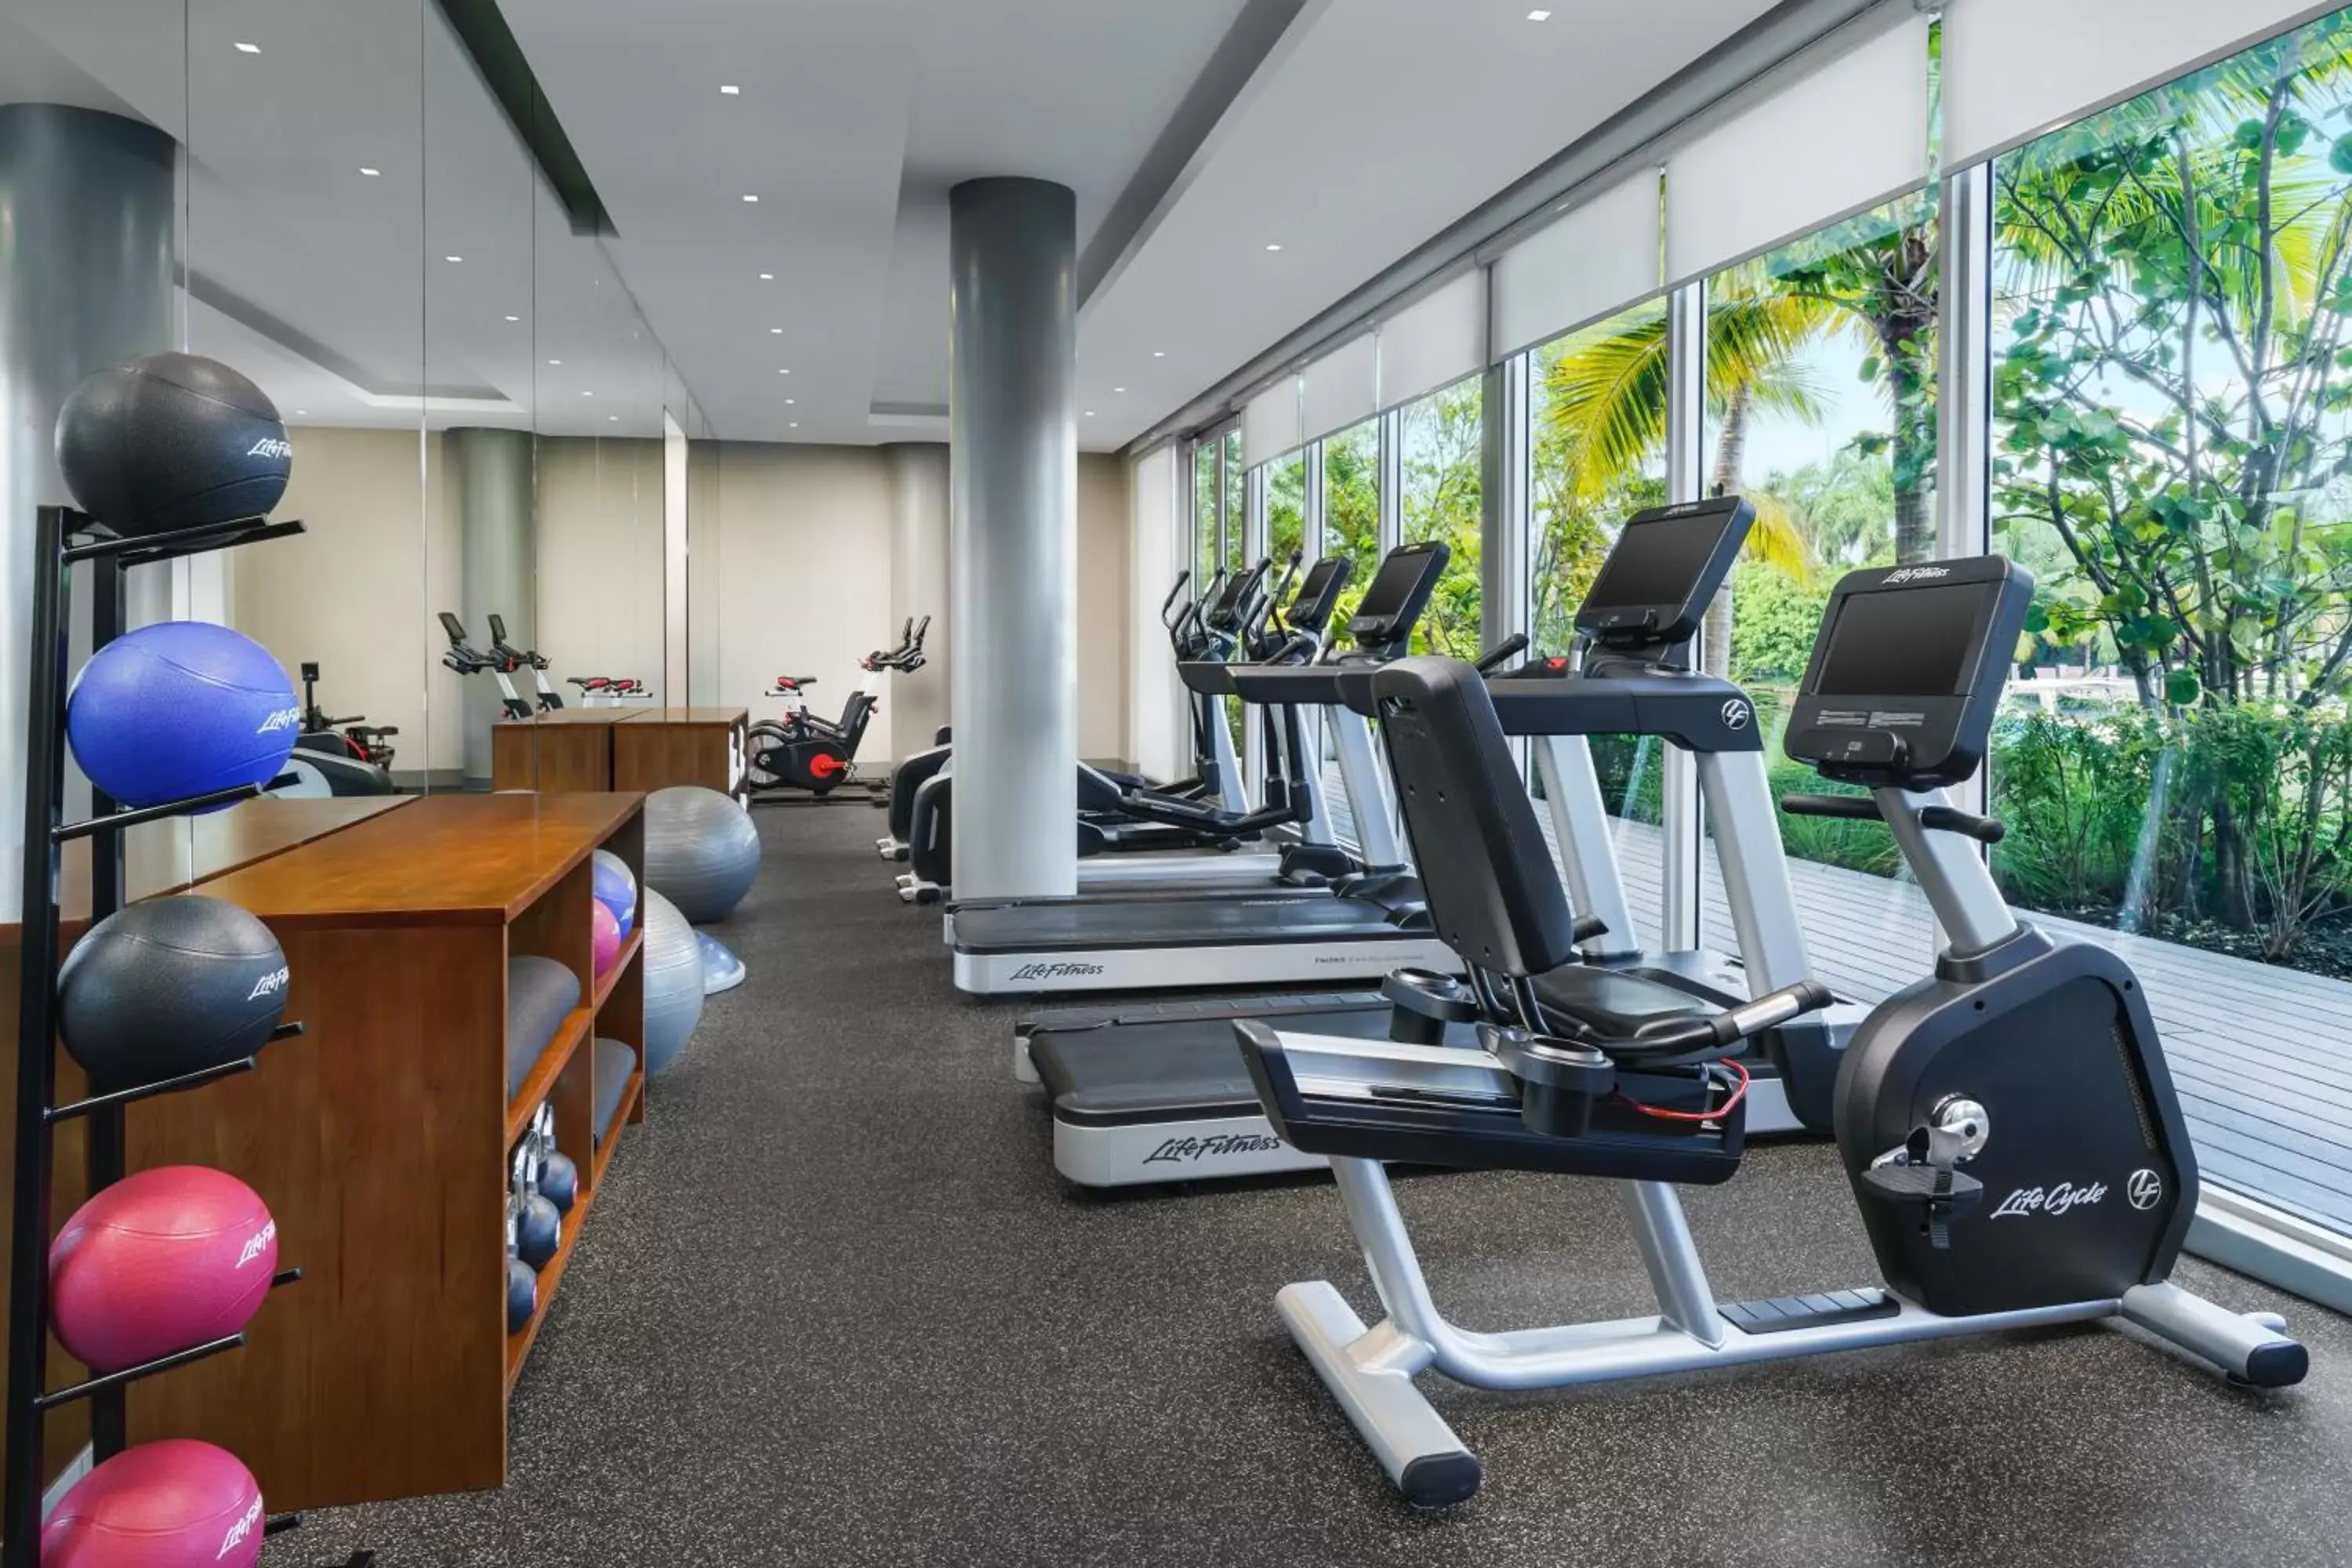 Fitness centre/facilities, Fitness Center/Facilities in The Altair Bay Harbor Hotel